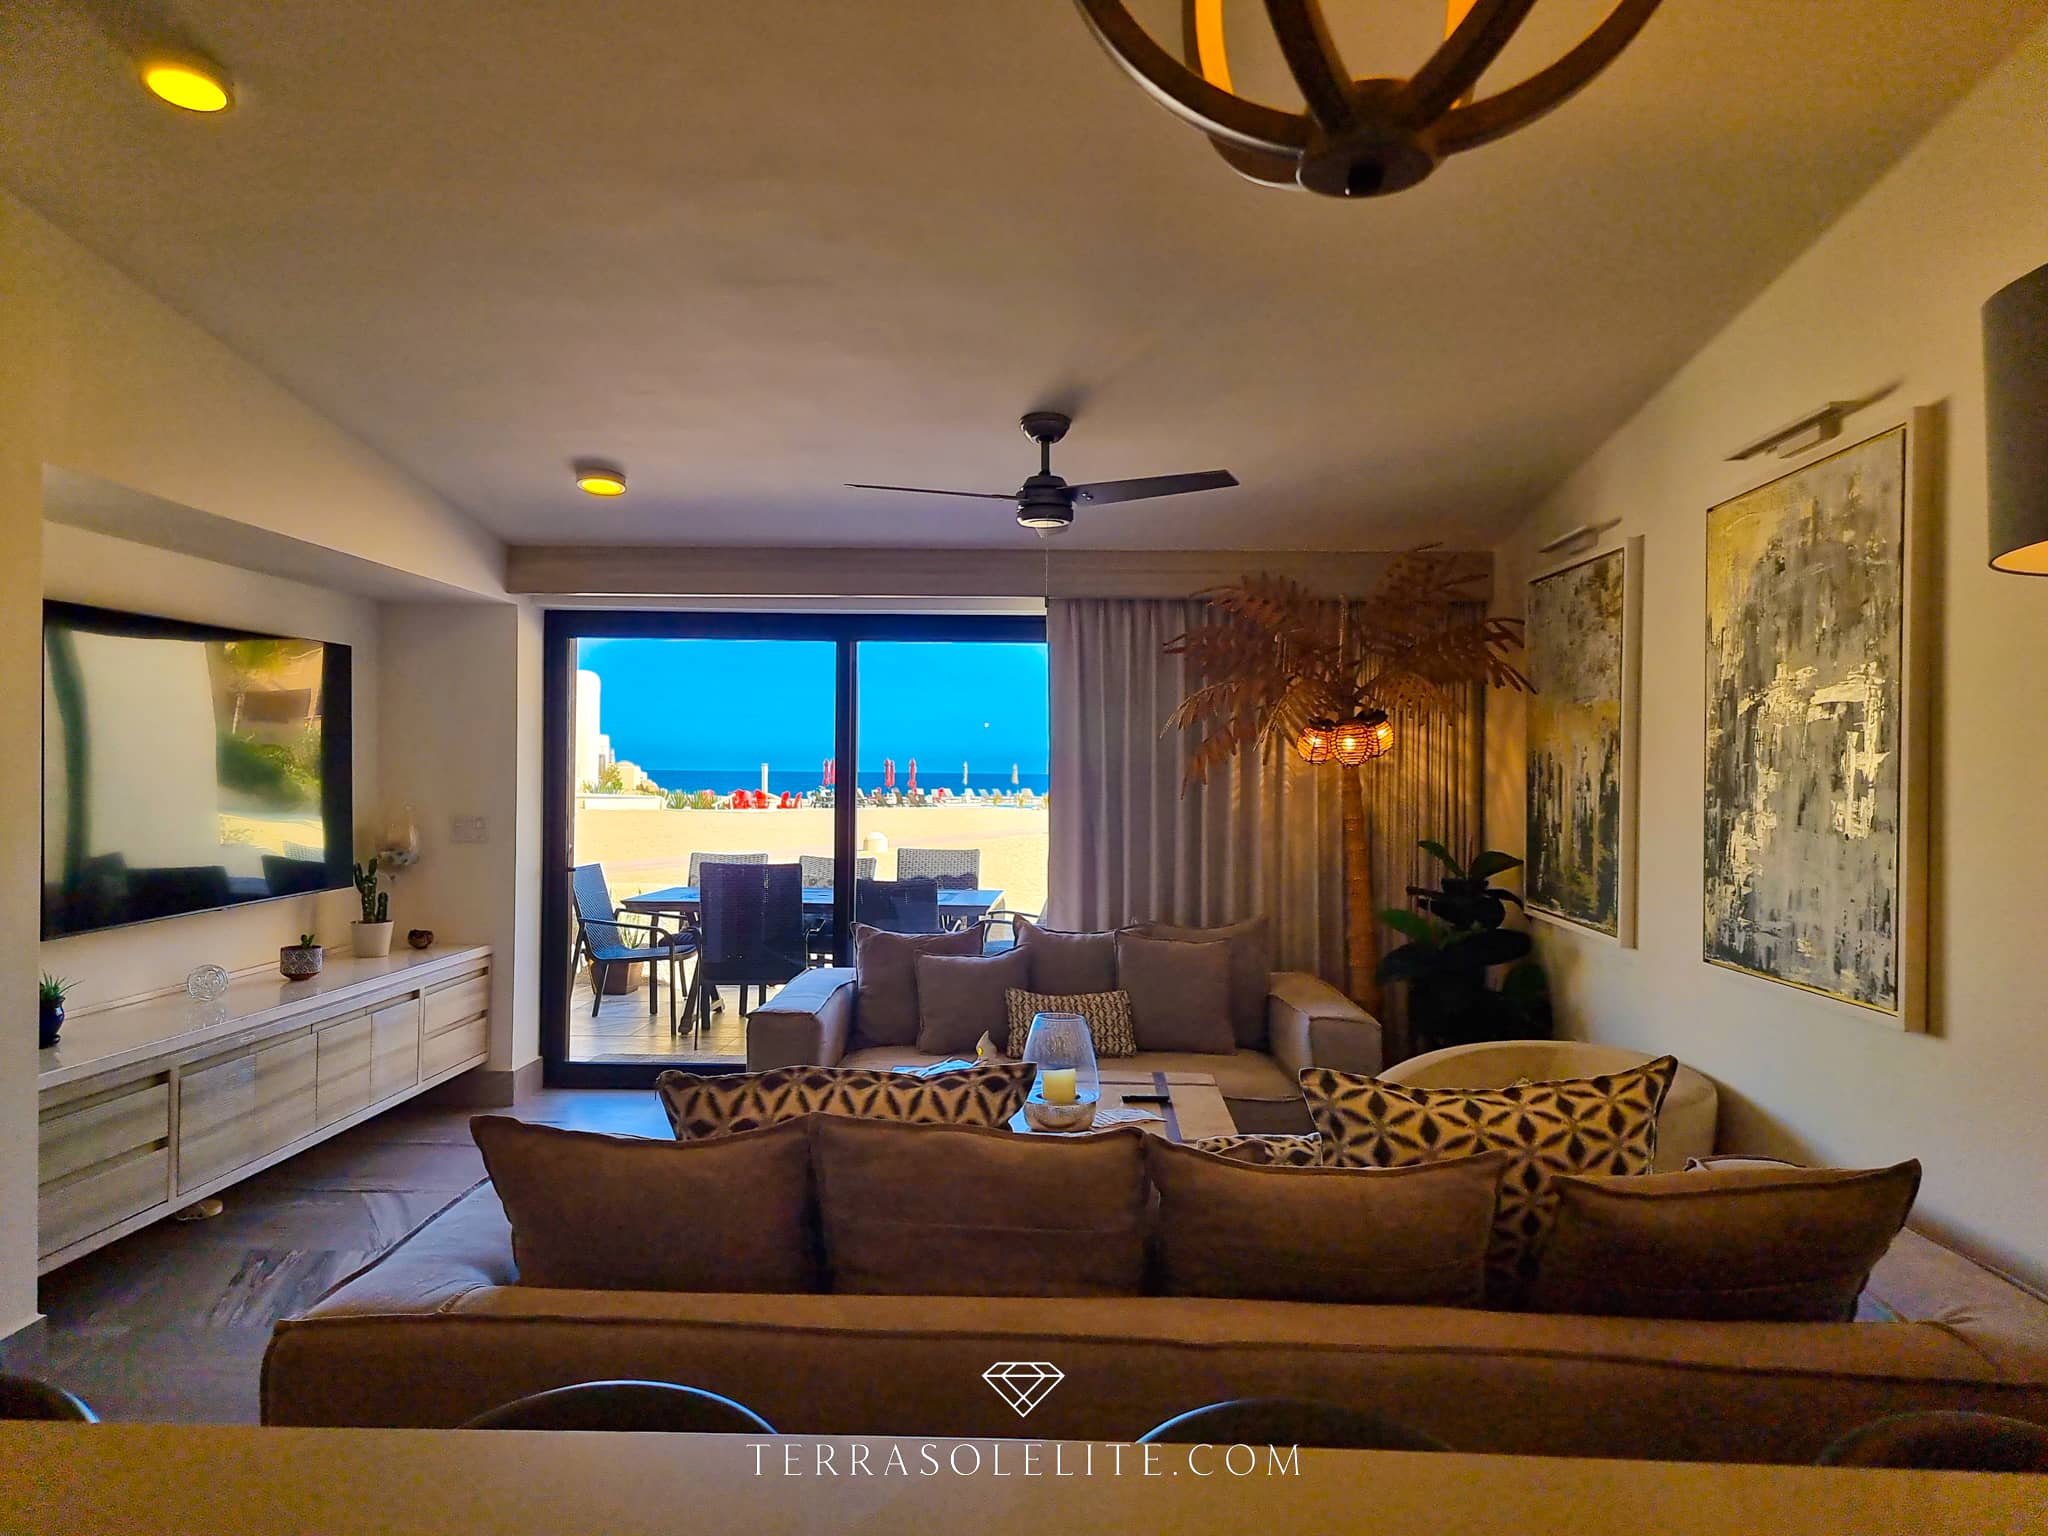 Lodging for vacations in Los Cabos